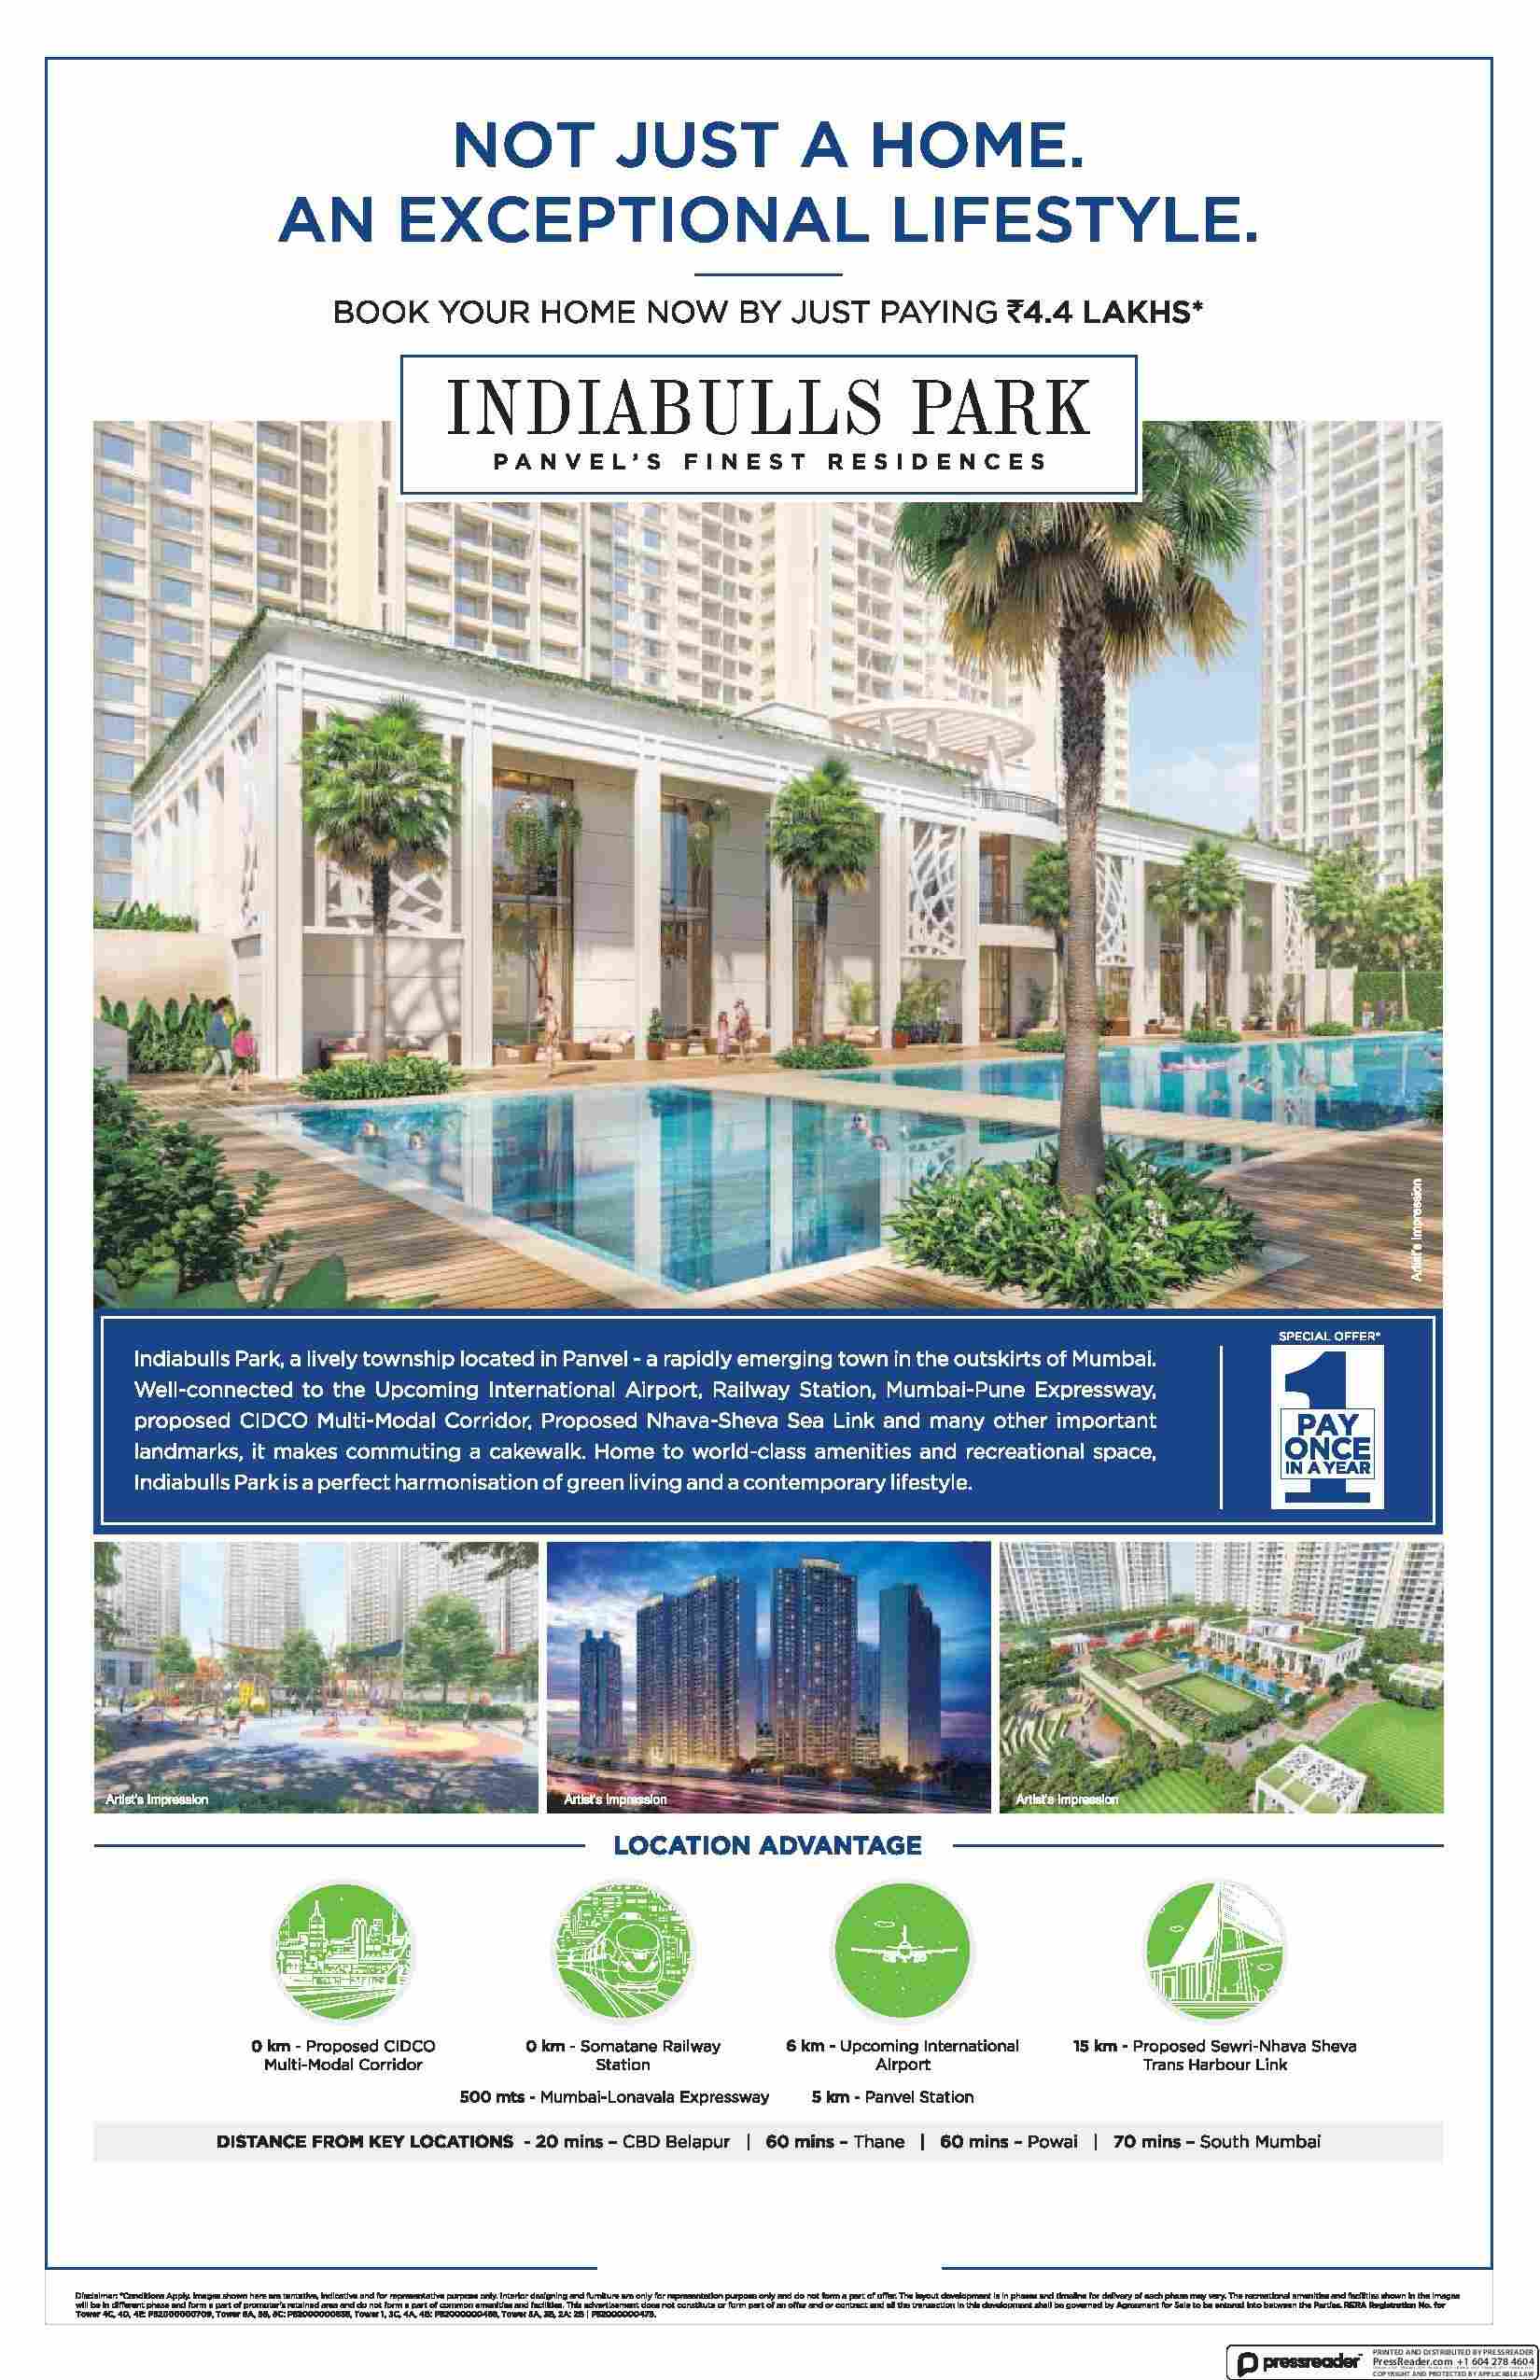 Book your home by just paying Rs 4.4 Lakhs at Indiabulls Park in Panvel, Mumbai